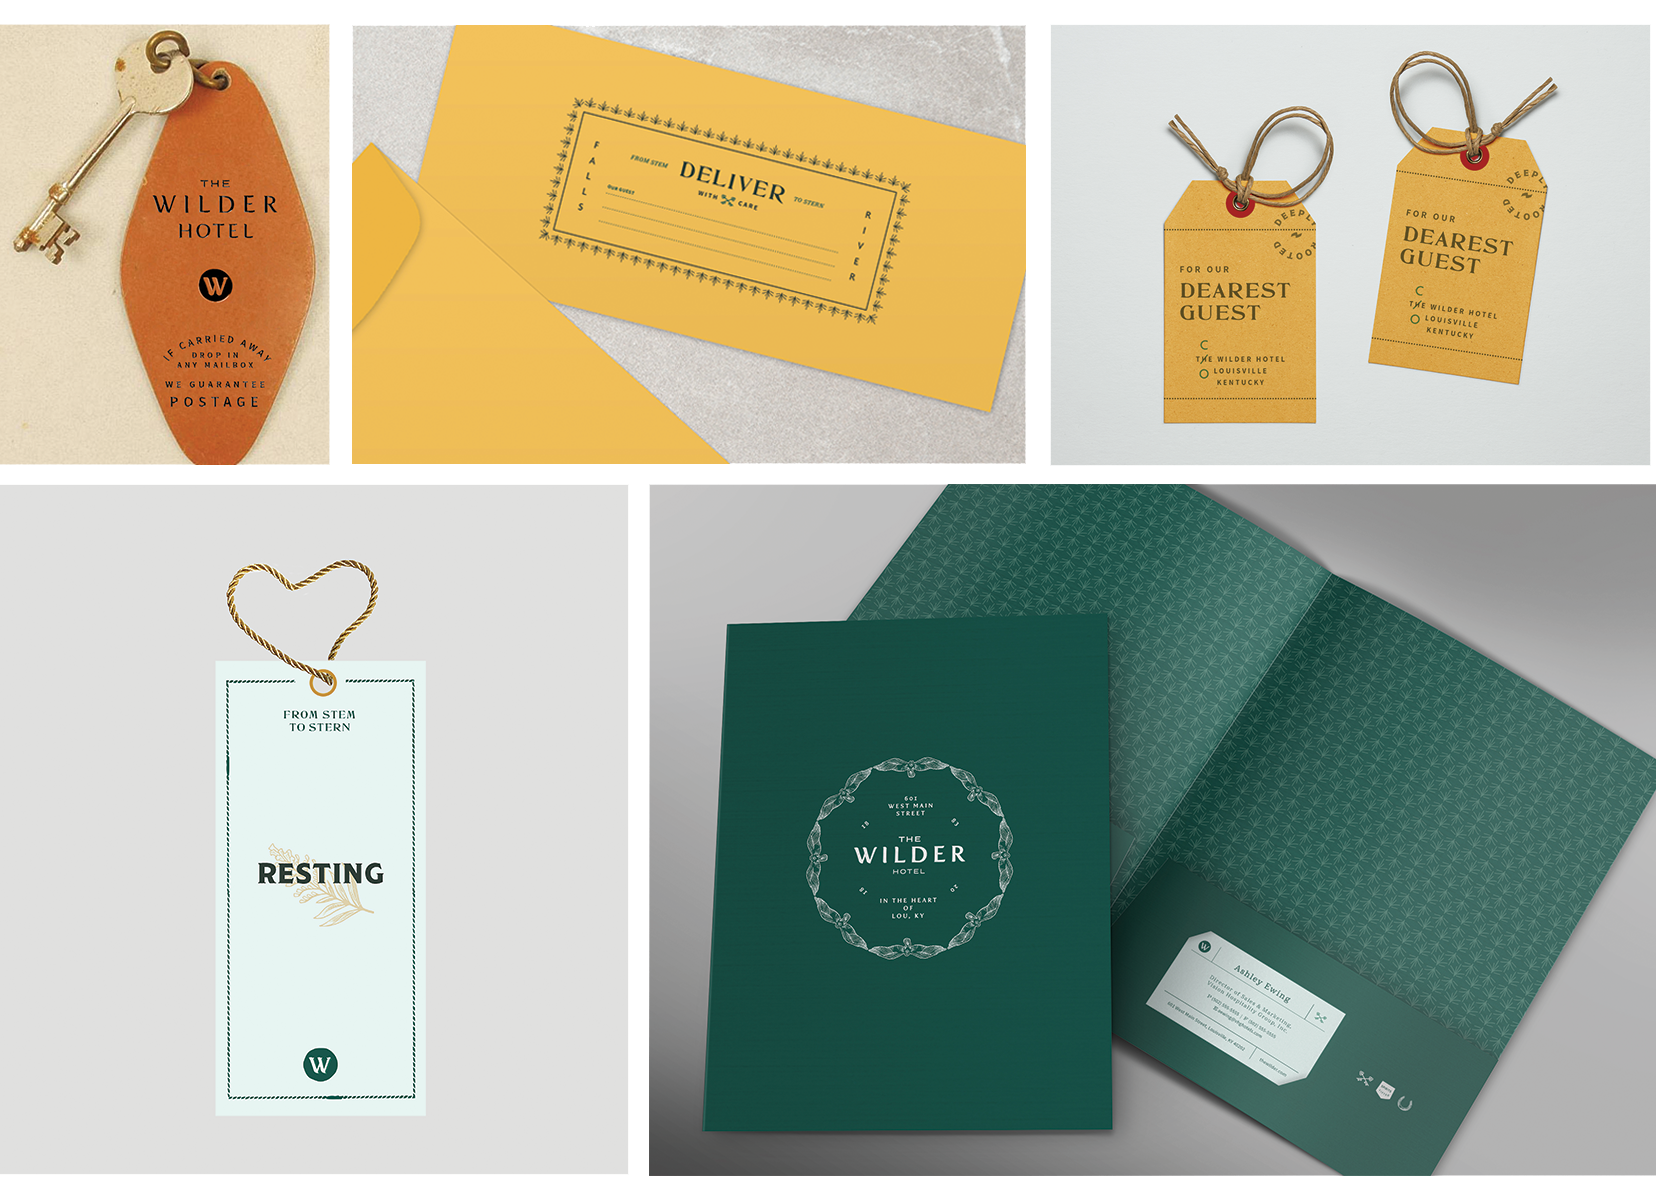 The Wilder Hotel branded key tag, envelope, luggage tags, door tag, and folder.